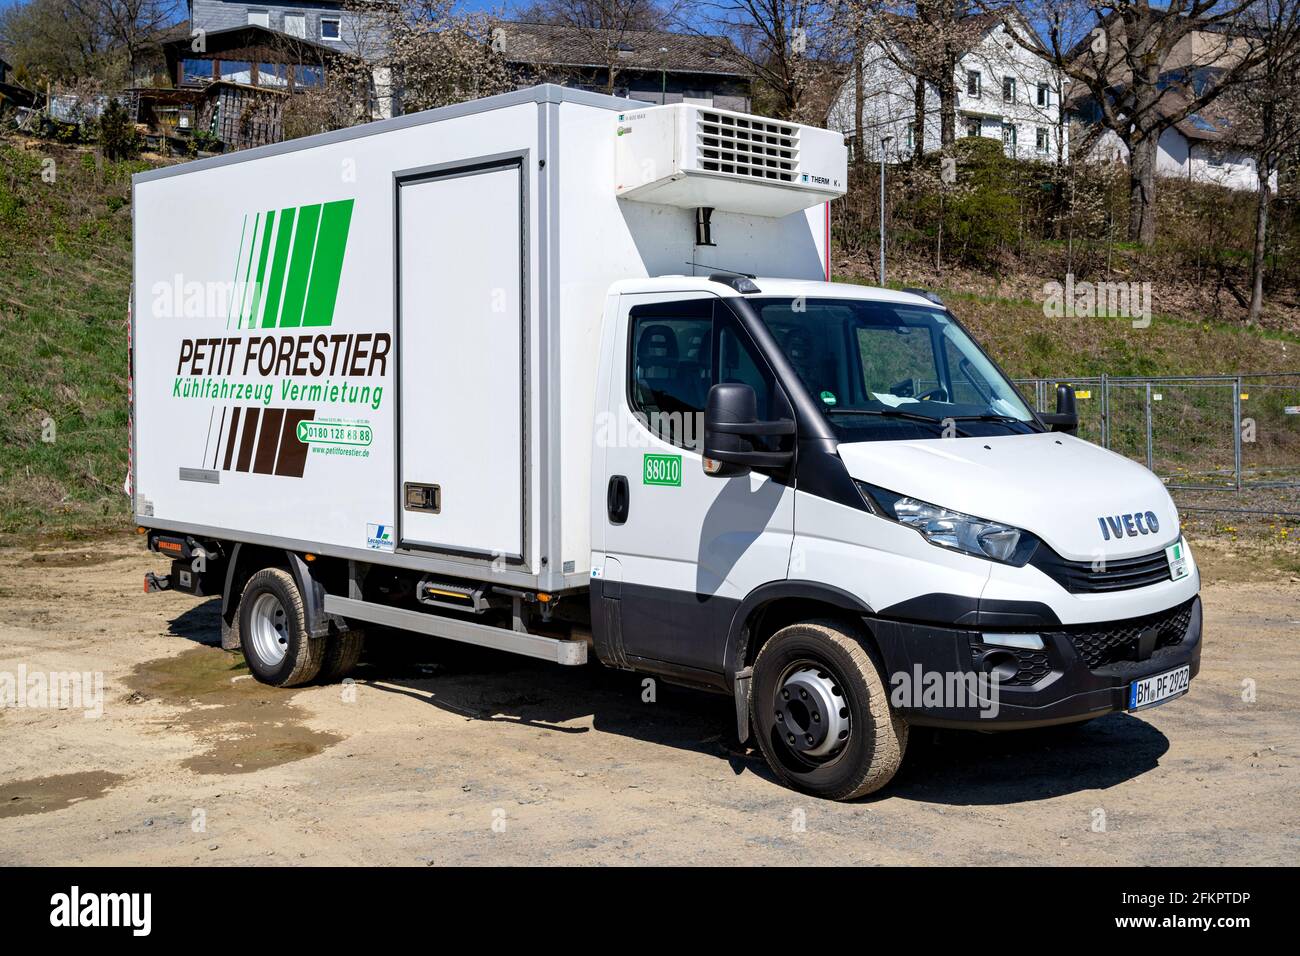 Petit Forestier Iveco Daily van. Petit Forestier is the European leader in refrigerated vehicle and container rental. Stock Photo